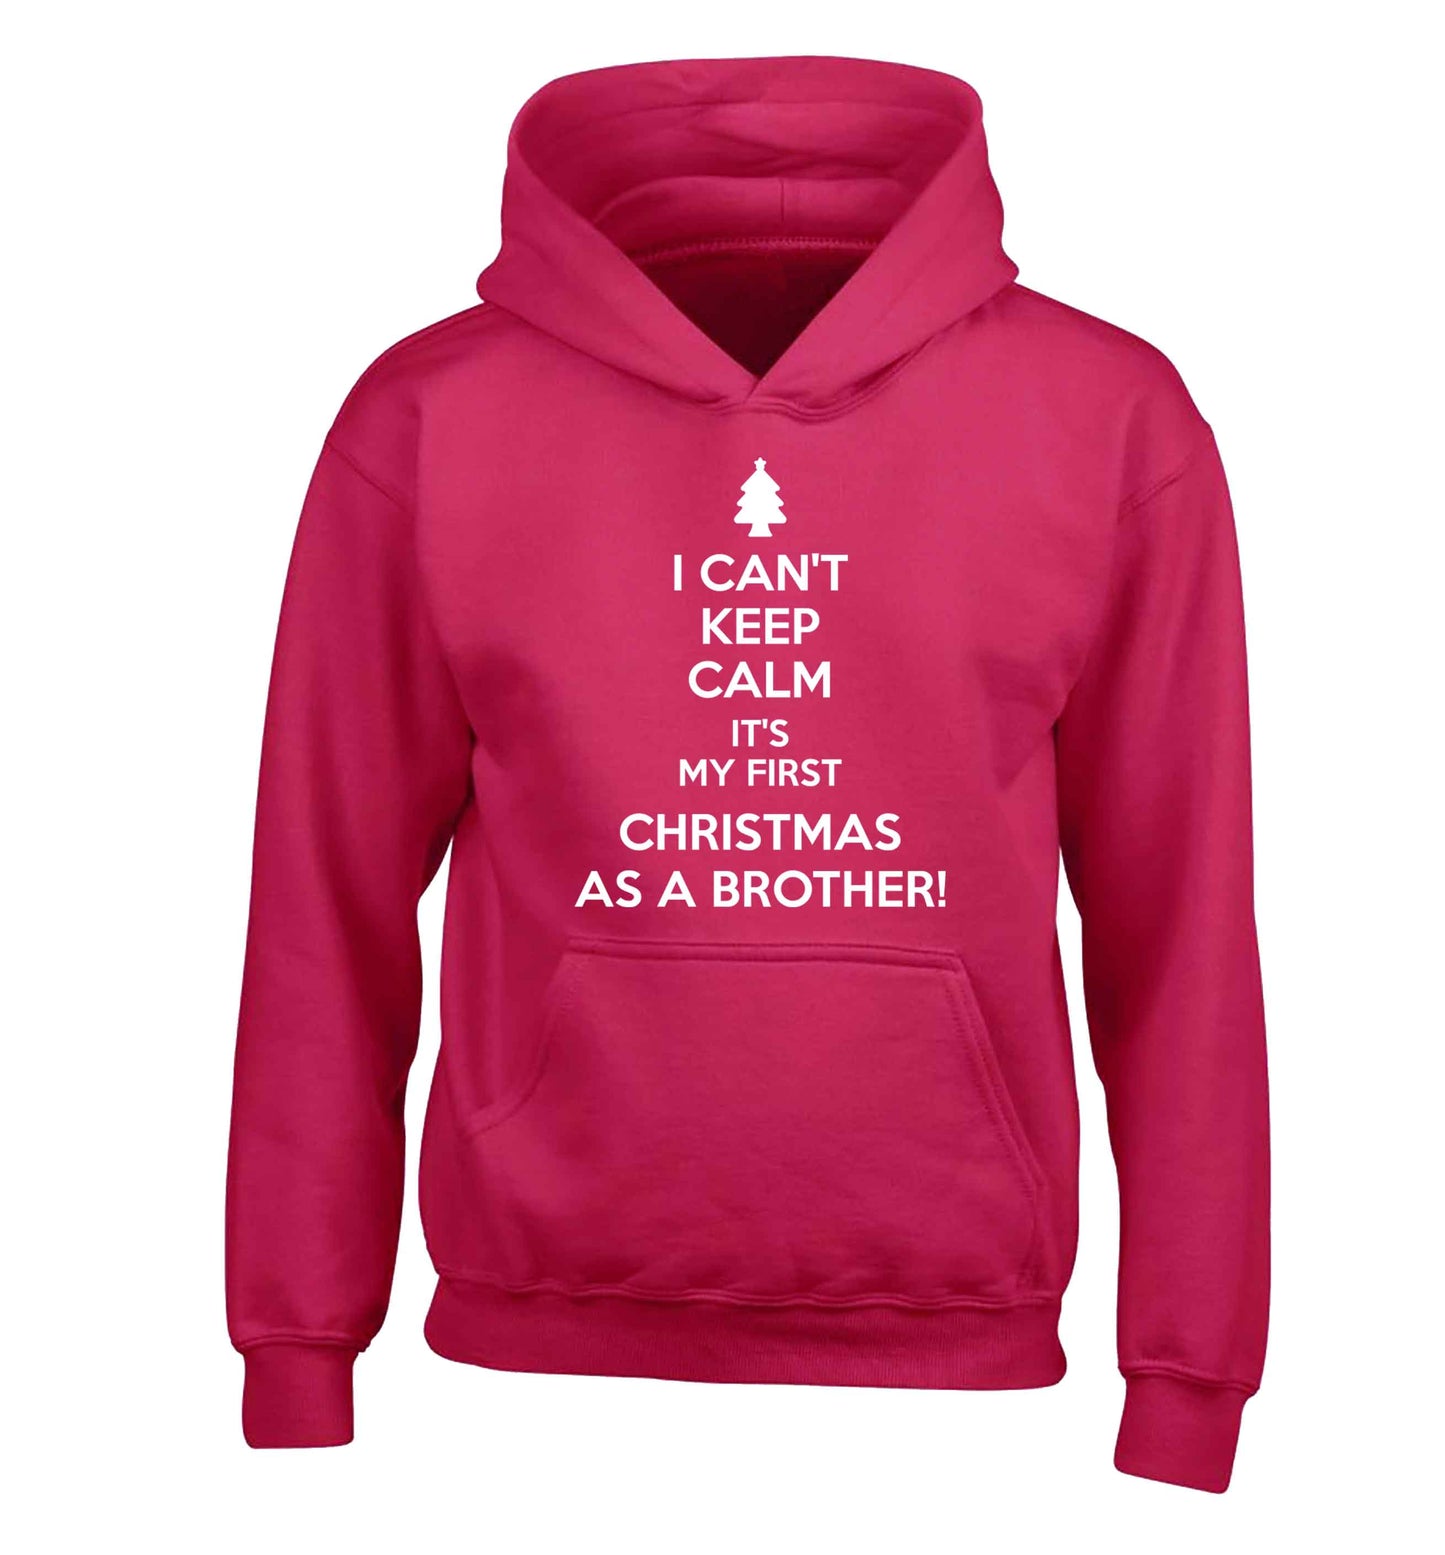 I can't keep calm it's my first Christmas as a brother! children's pink hoodie 12-13 Years